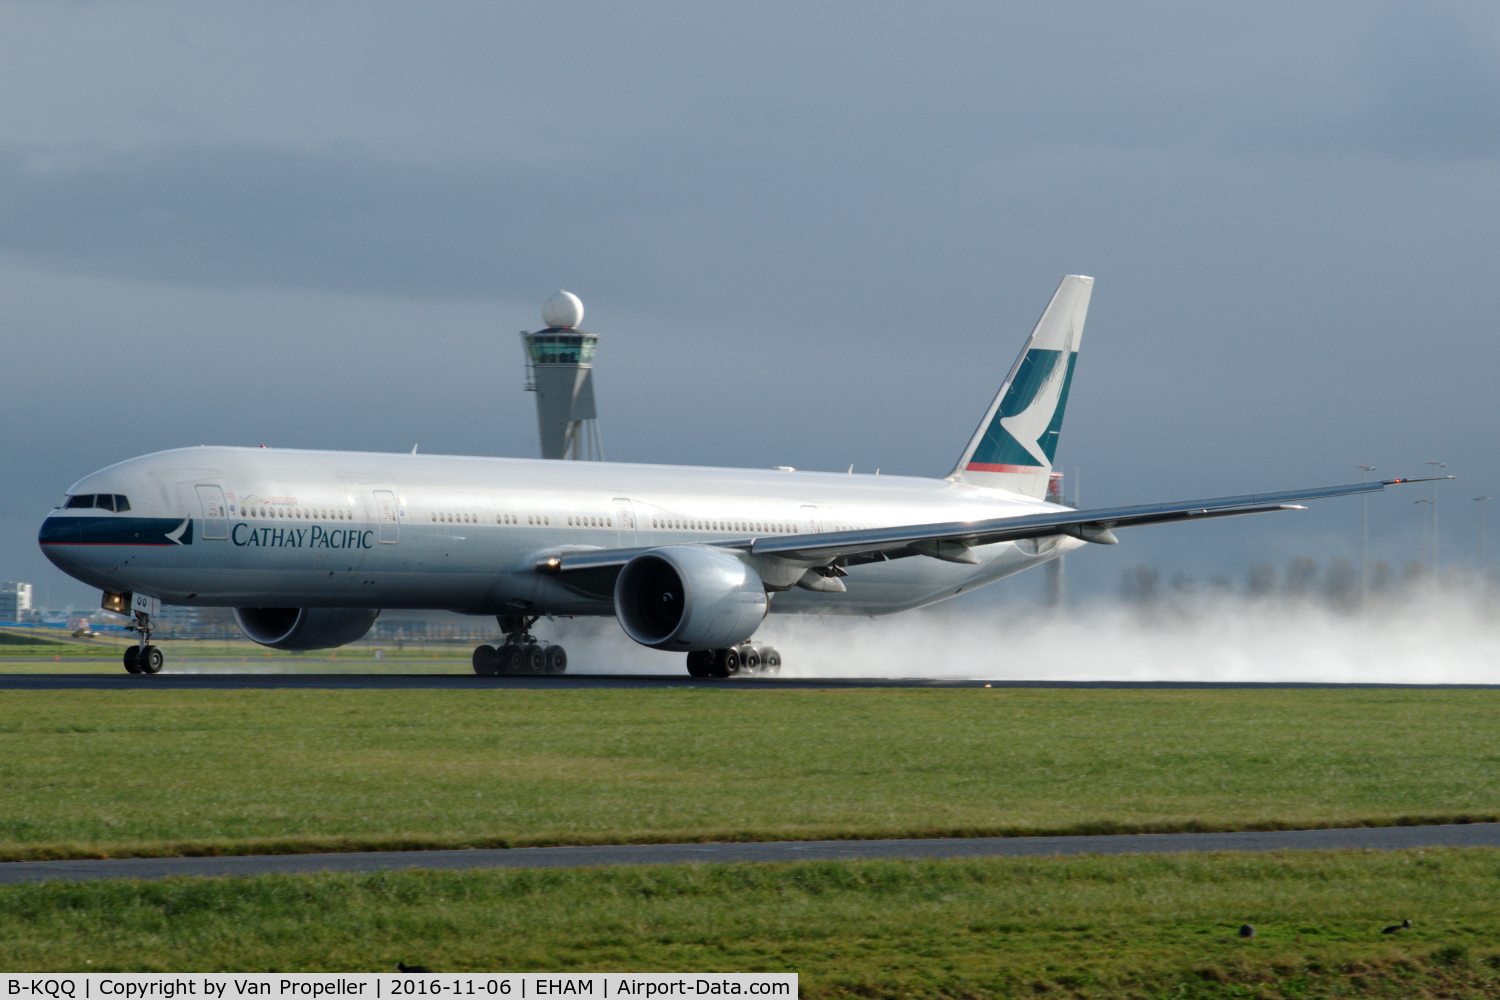 B-KQQ, 2014 Boeing 777-367/ER C/N 41762, Cathay Pacific Airways Boeing 777-367ER taking off from a wet runway at Schiphol airport, the Netherlands